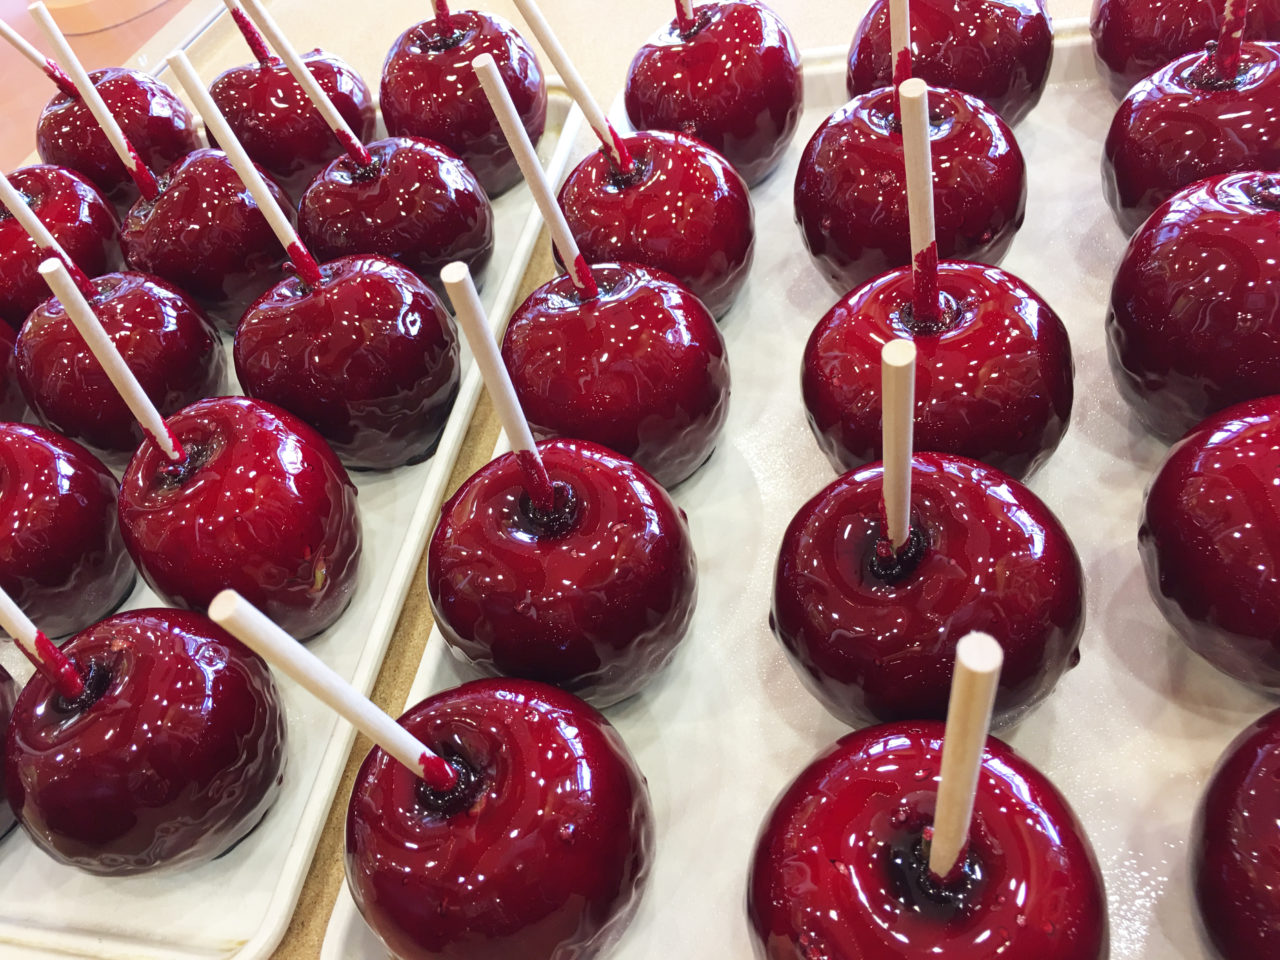 How To Make Candy Apples